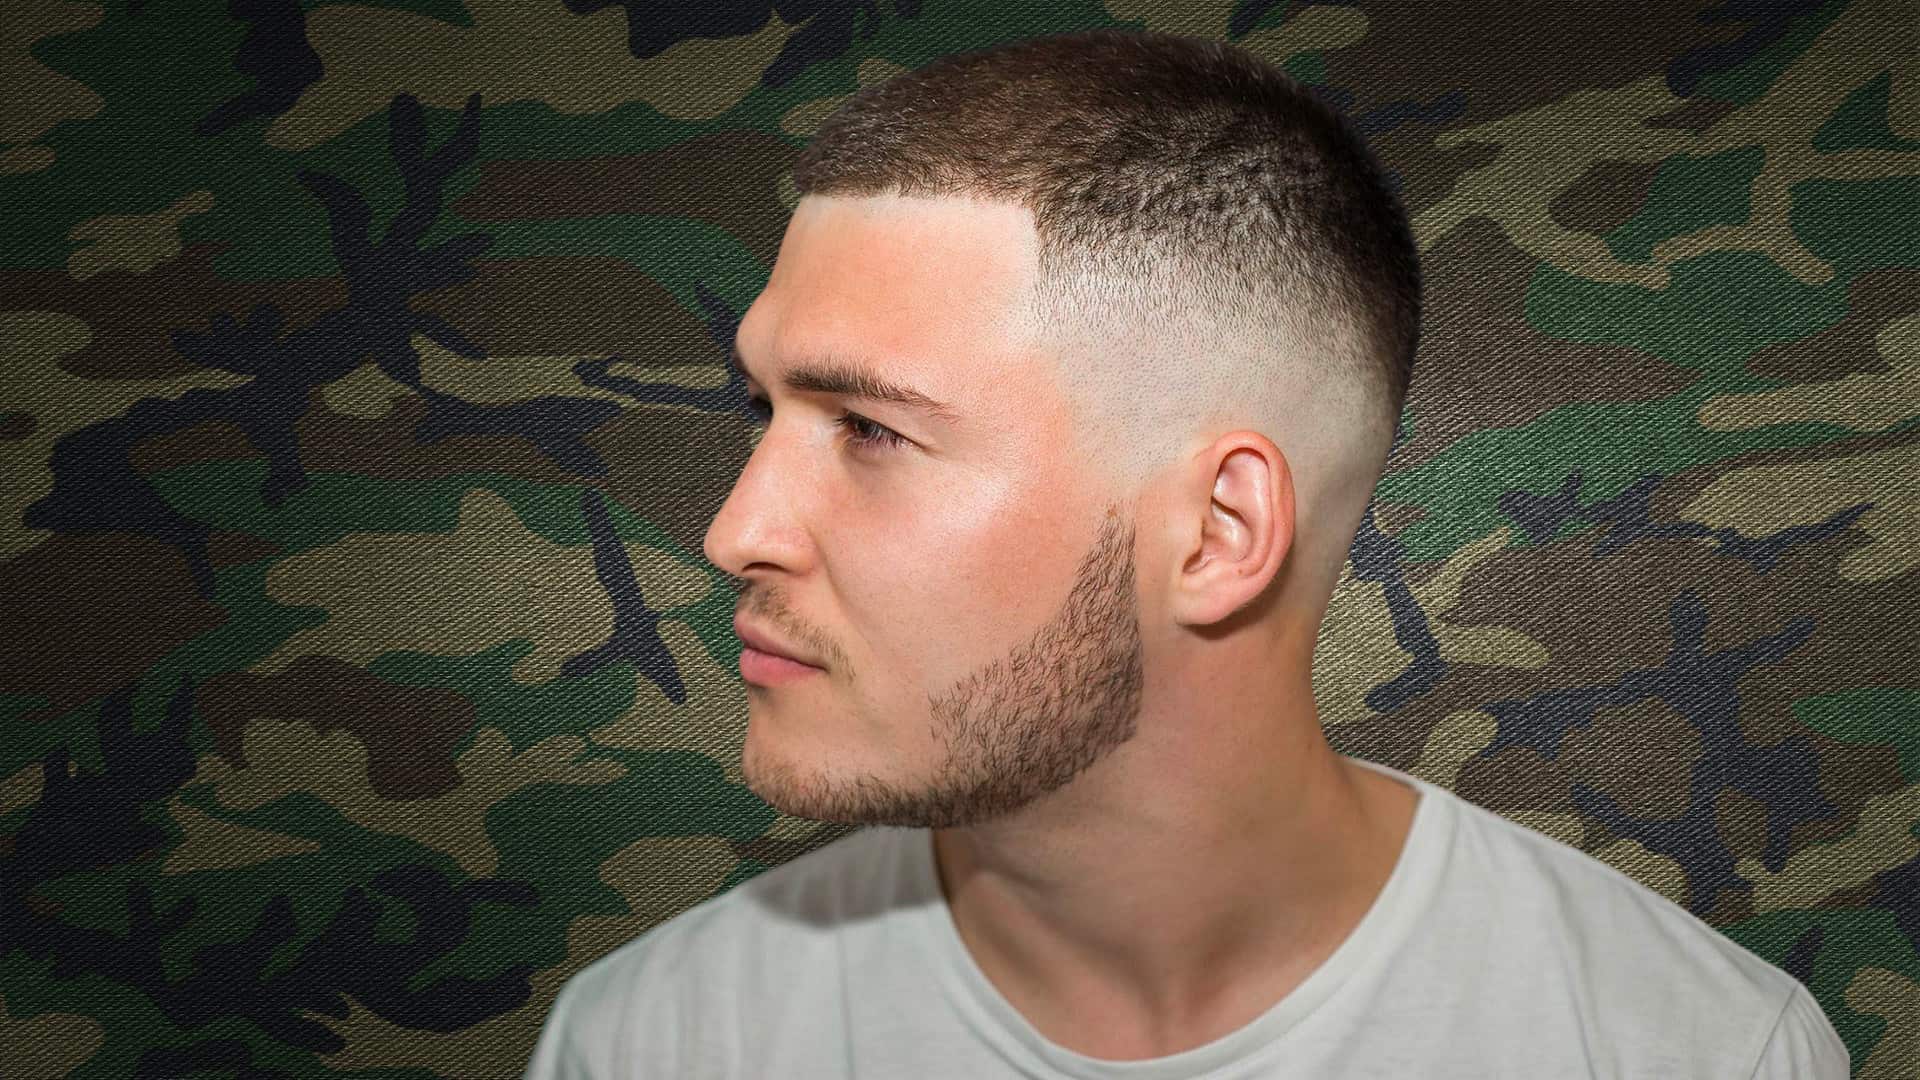 20 Awesome Military Haircuts for Men | Haircut Inspiration